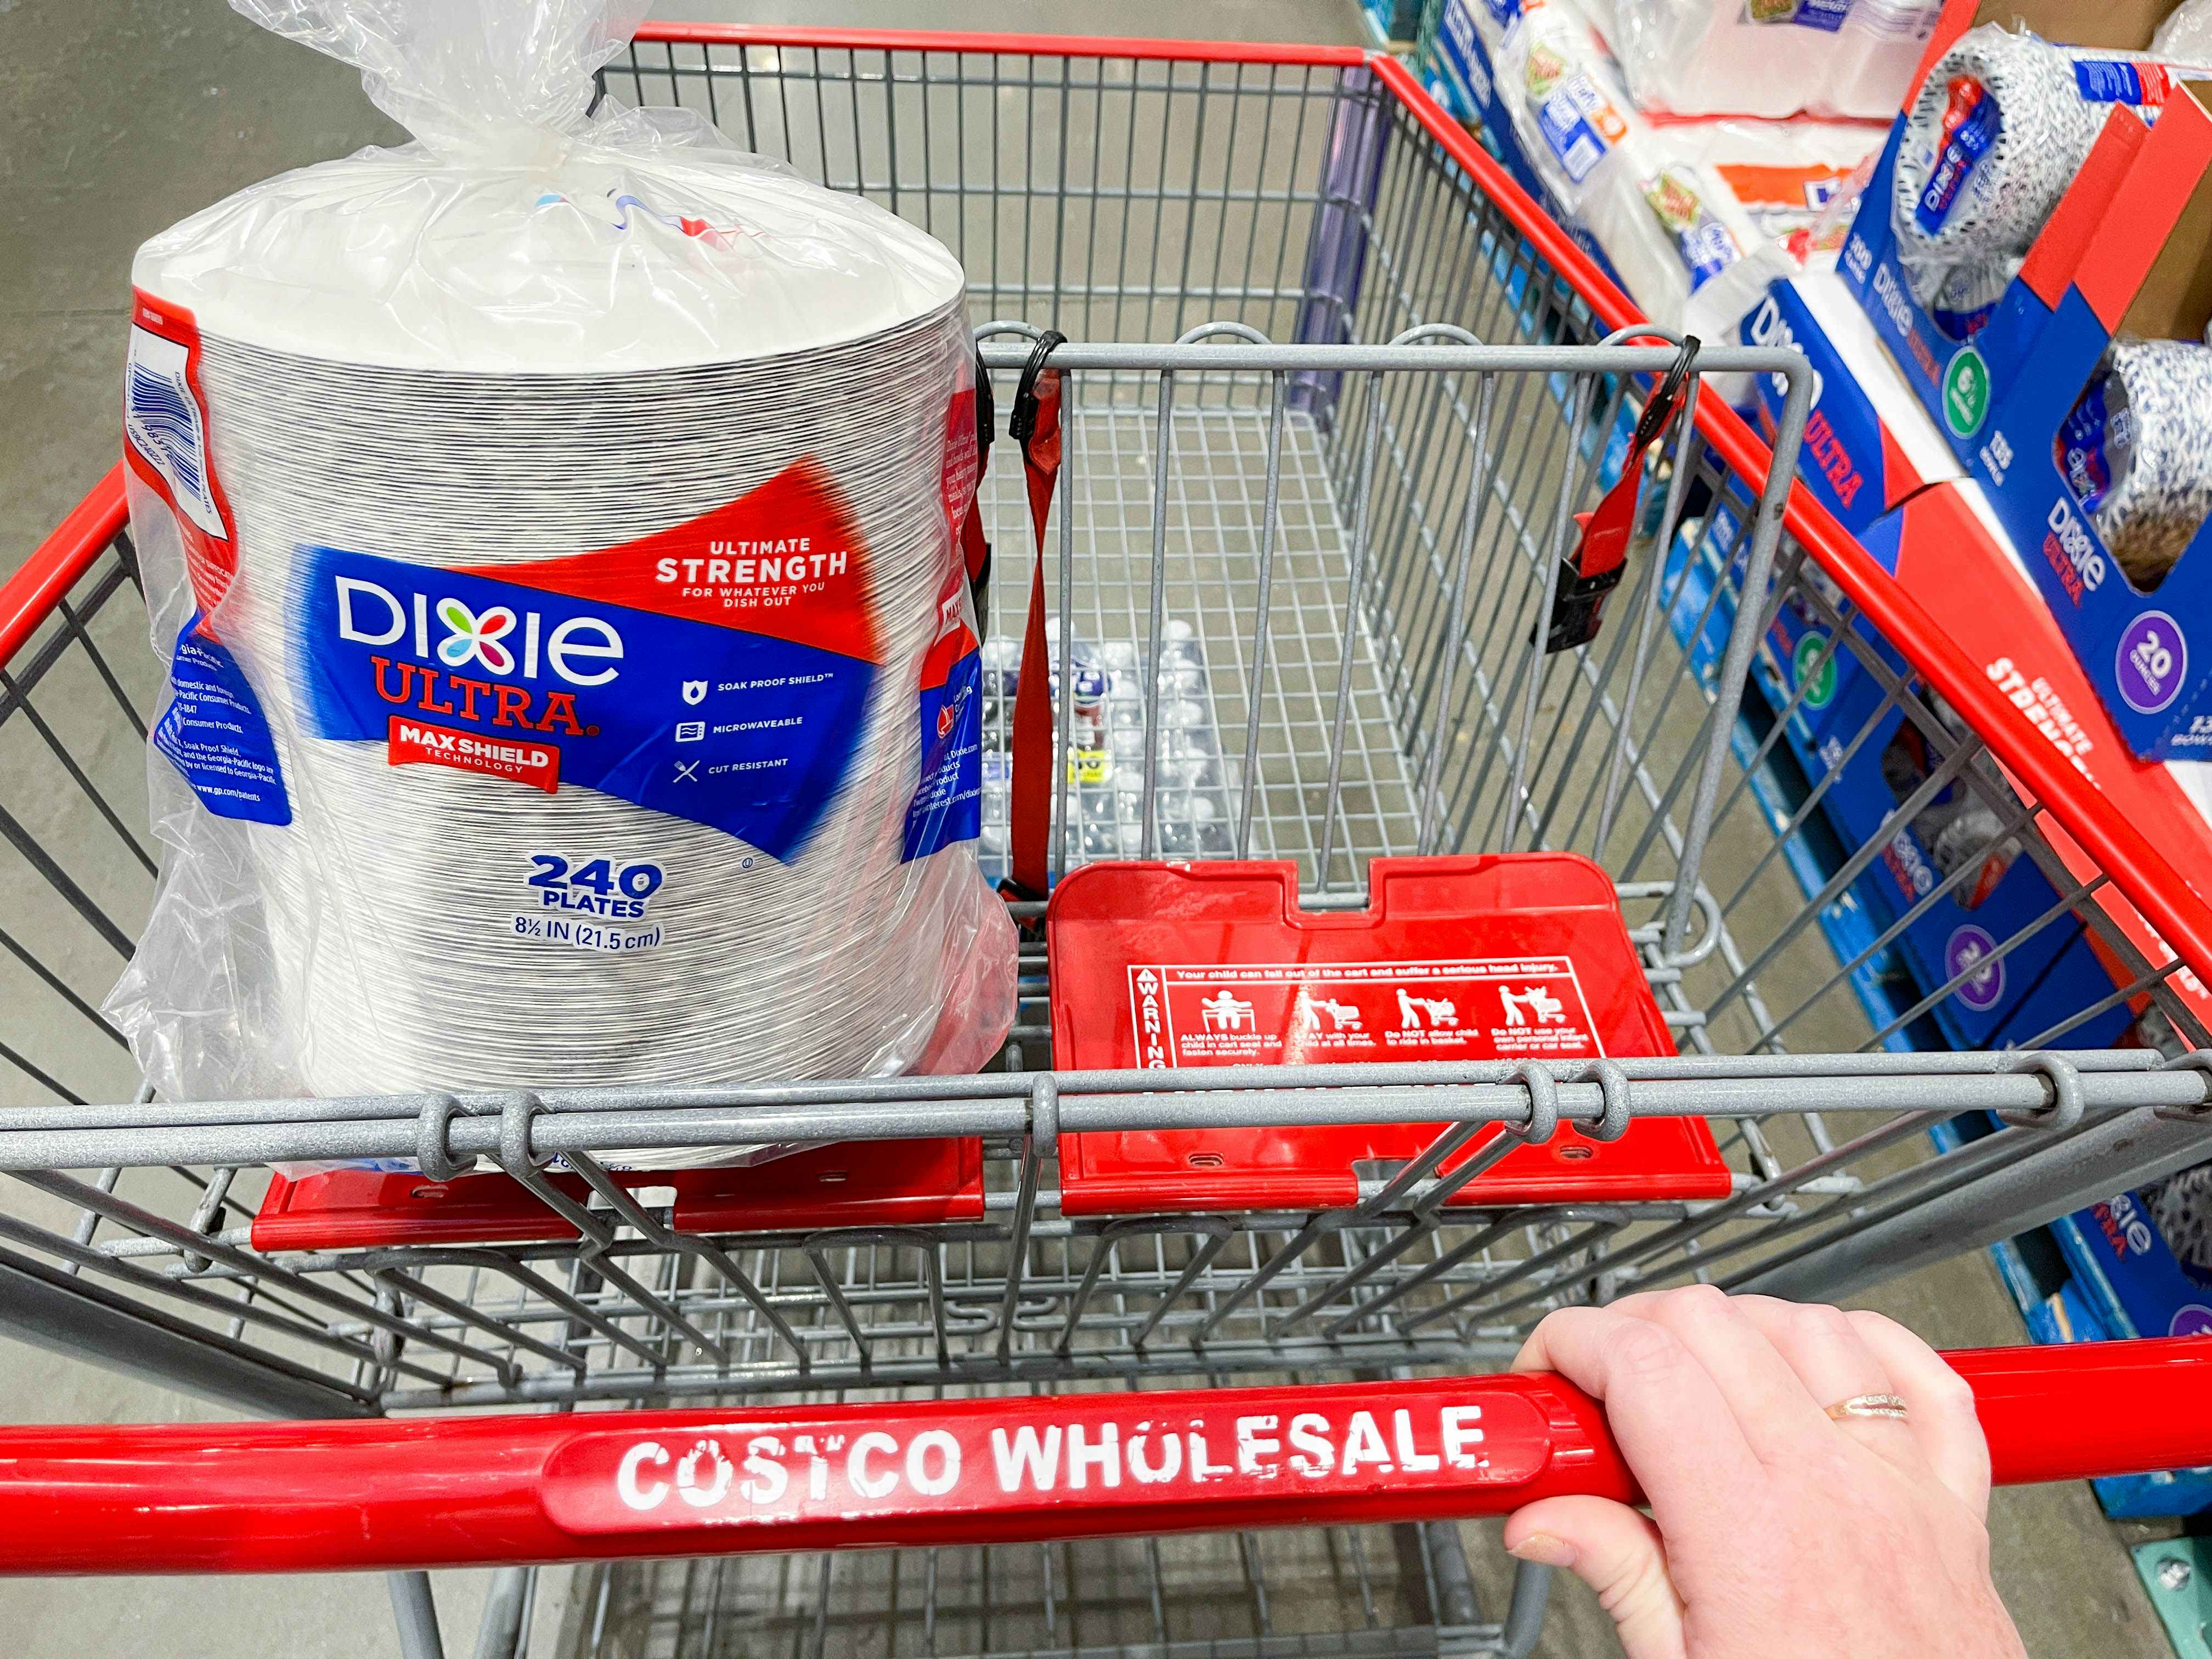 a package of paper plates in a costco cart